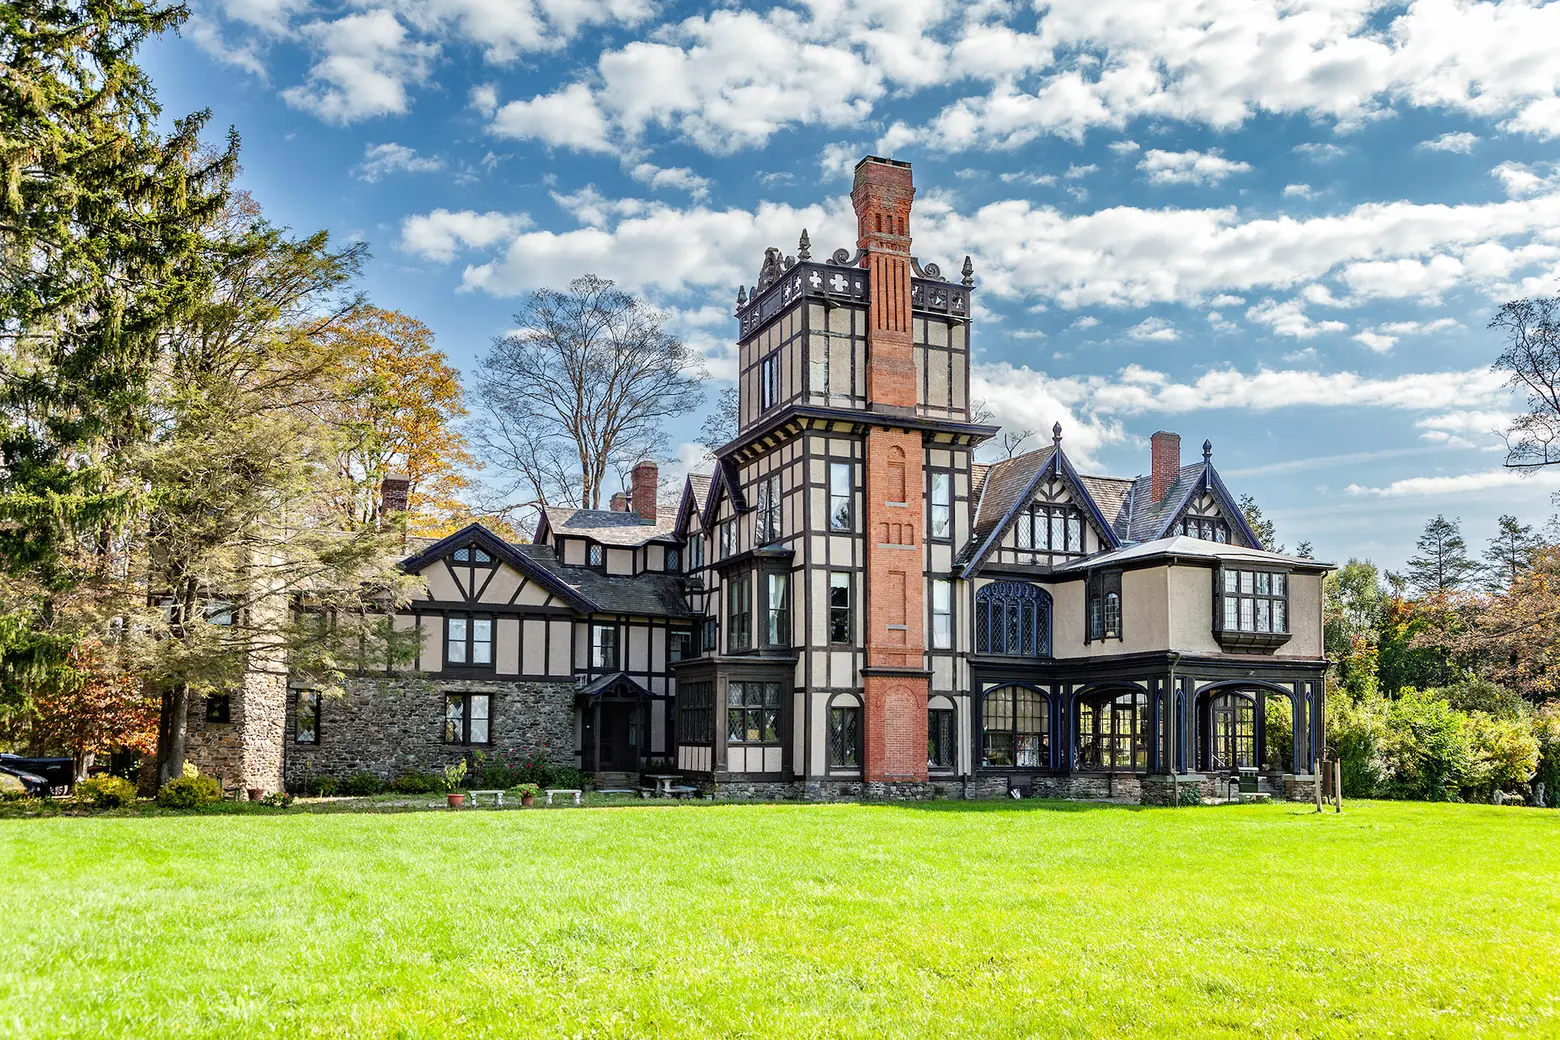 Sally Jessy Raphael’s $6.5M upstate manor comes with 17 bedrooms and 30 hand-carved mythical creatures